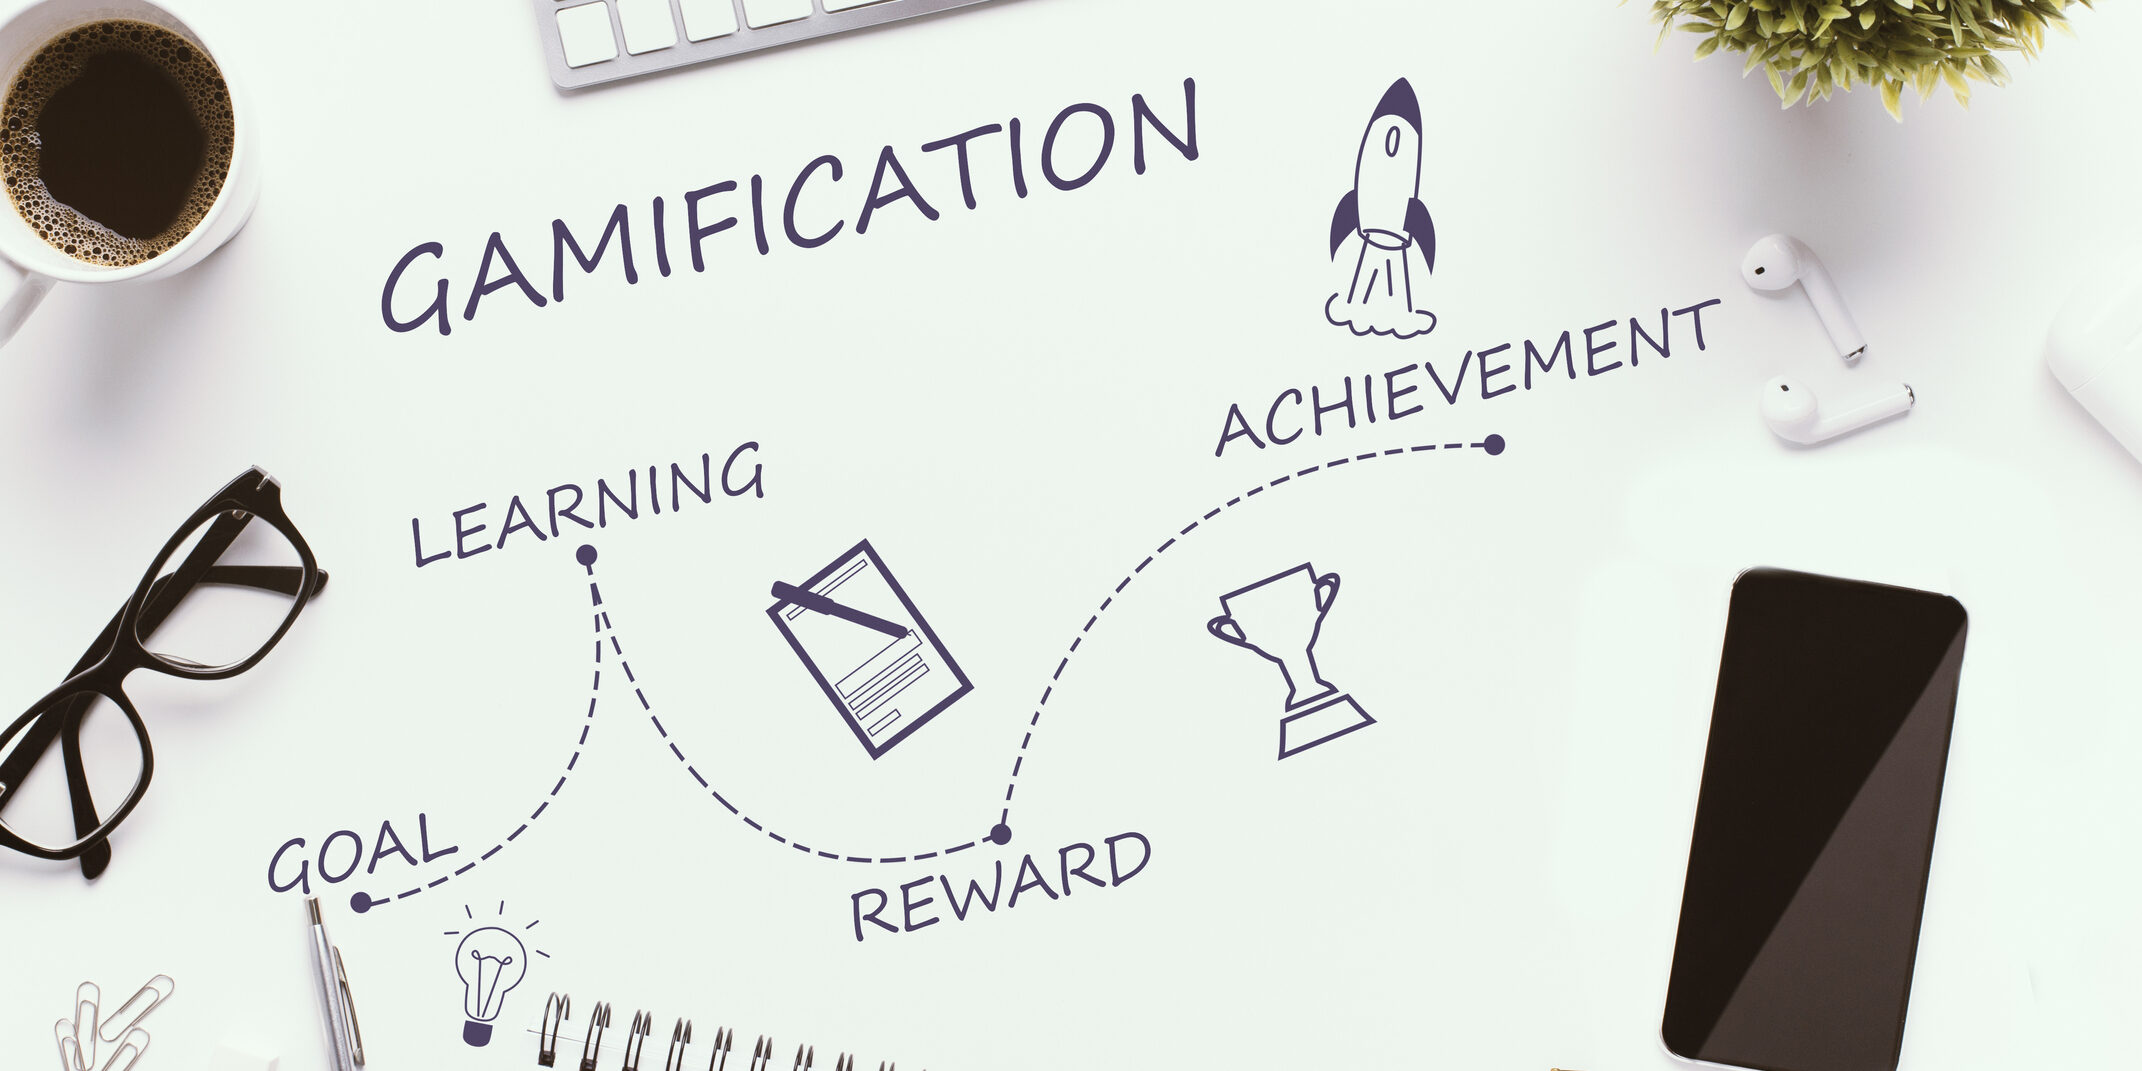 Gamification stages on white workplace - goal, learning, reward and achievement, top view